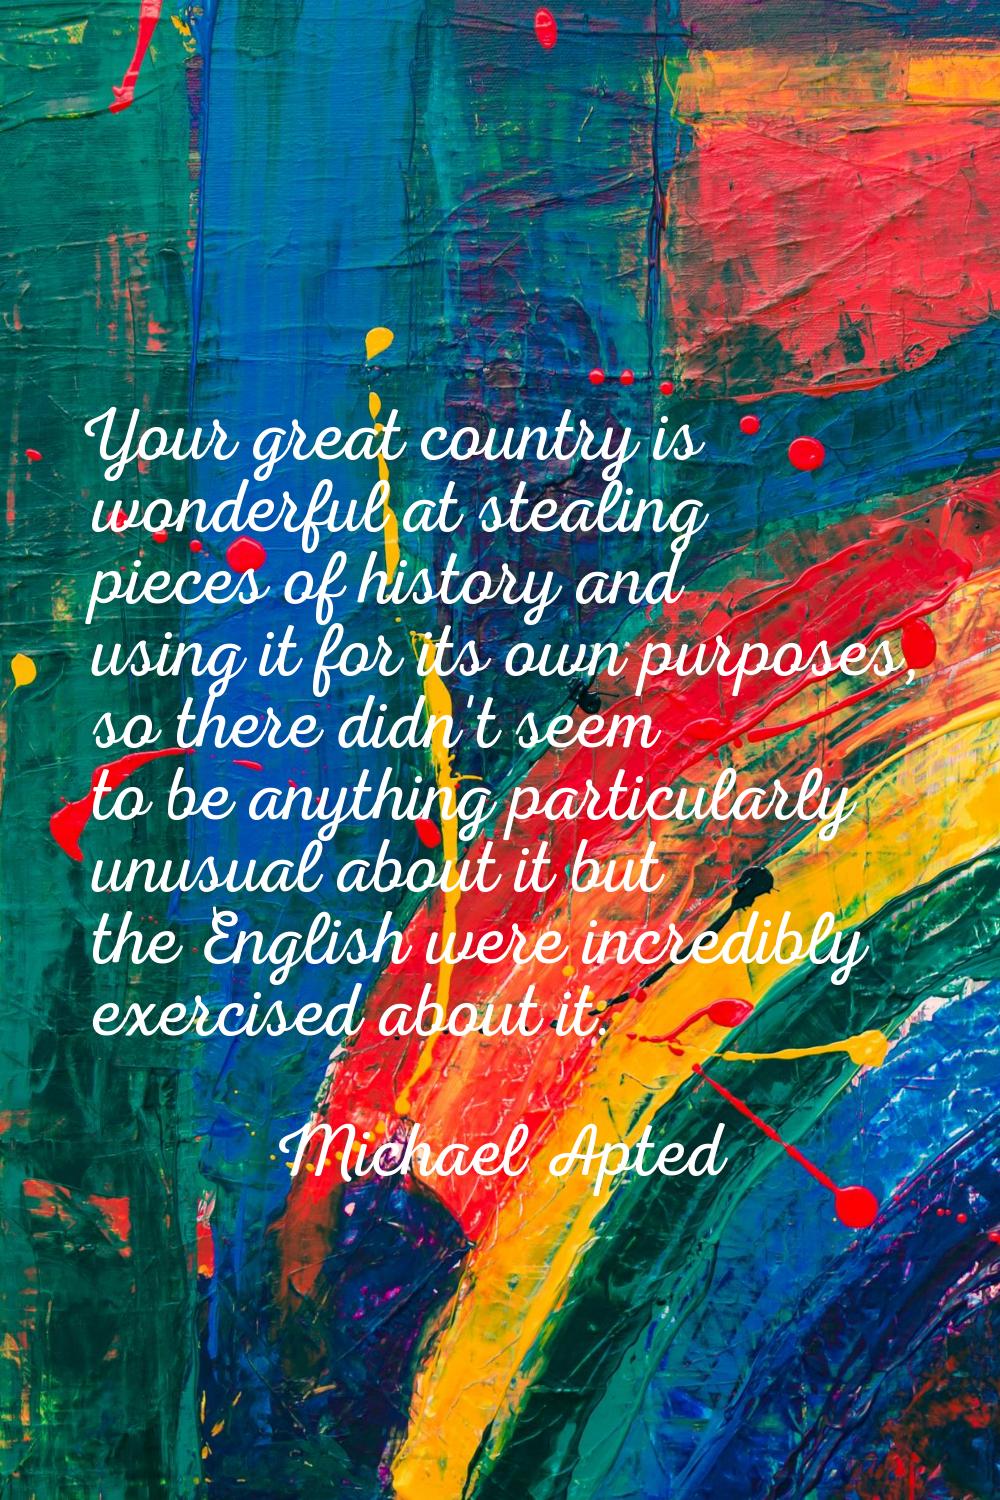 Your great country is wonderful at stealing pieces of history and using it for its own purposes, so